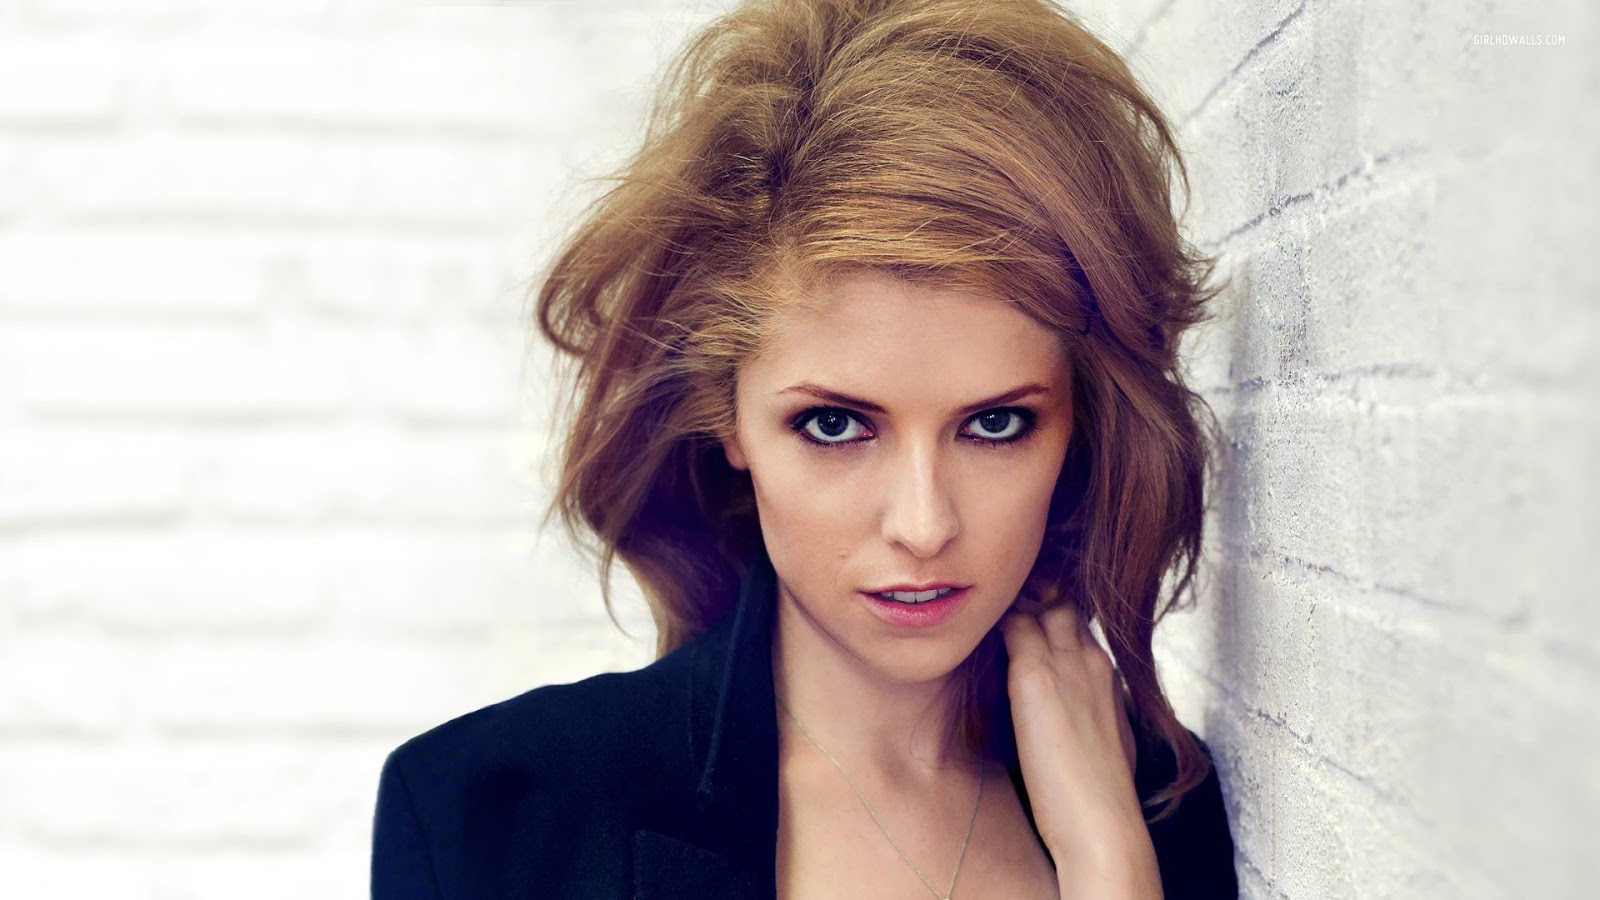 List of Actress Anna Kendrick new upcoming Hollywood movies in 2016, 2017 Calendar on Upcoming Wiki. Updated list of movies 2016-2017. Info about films released in wiki, imdb, wikipedia.